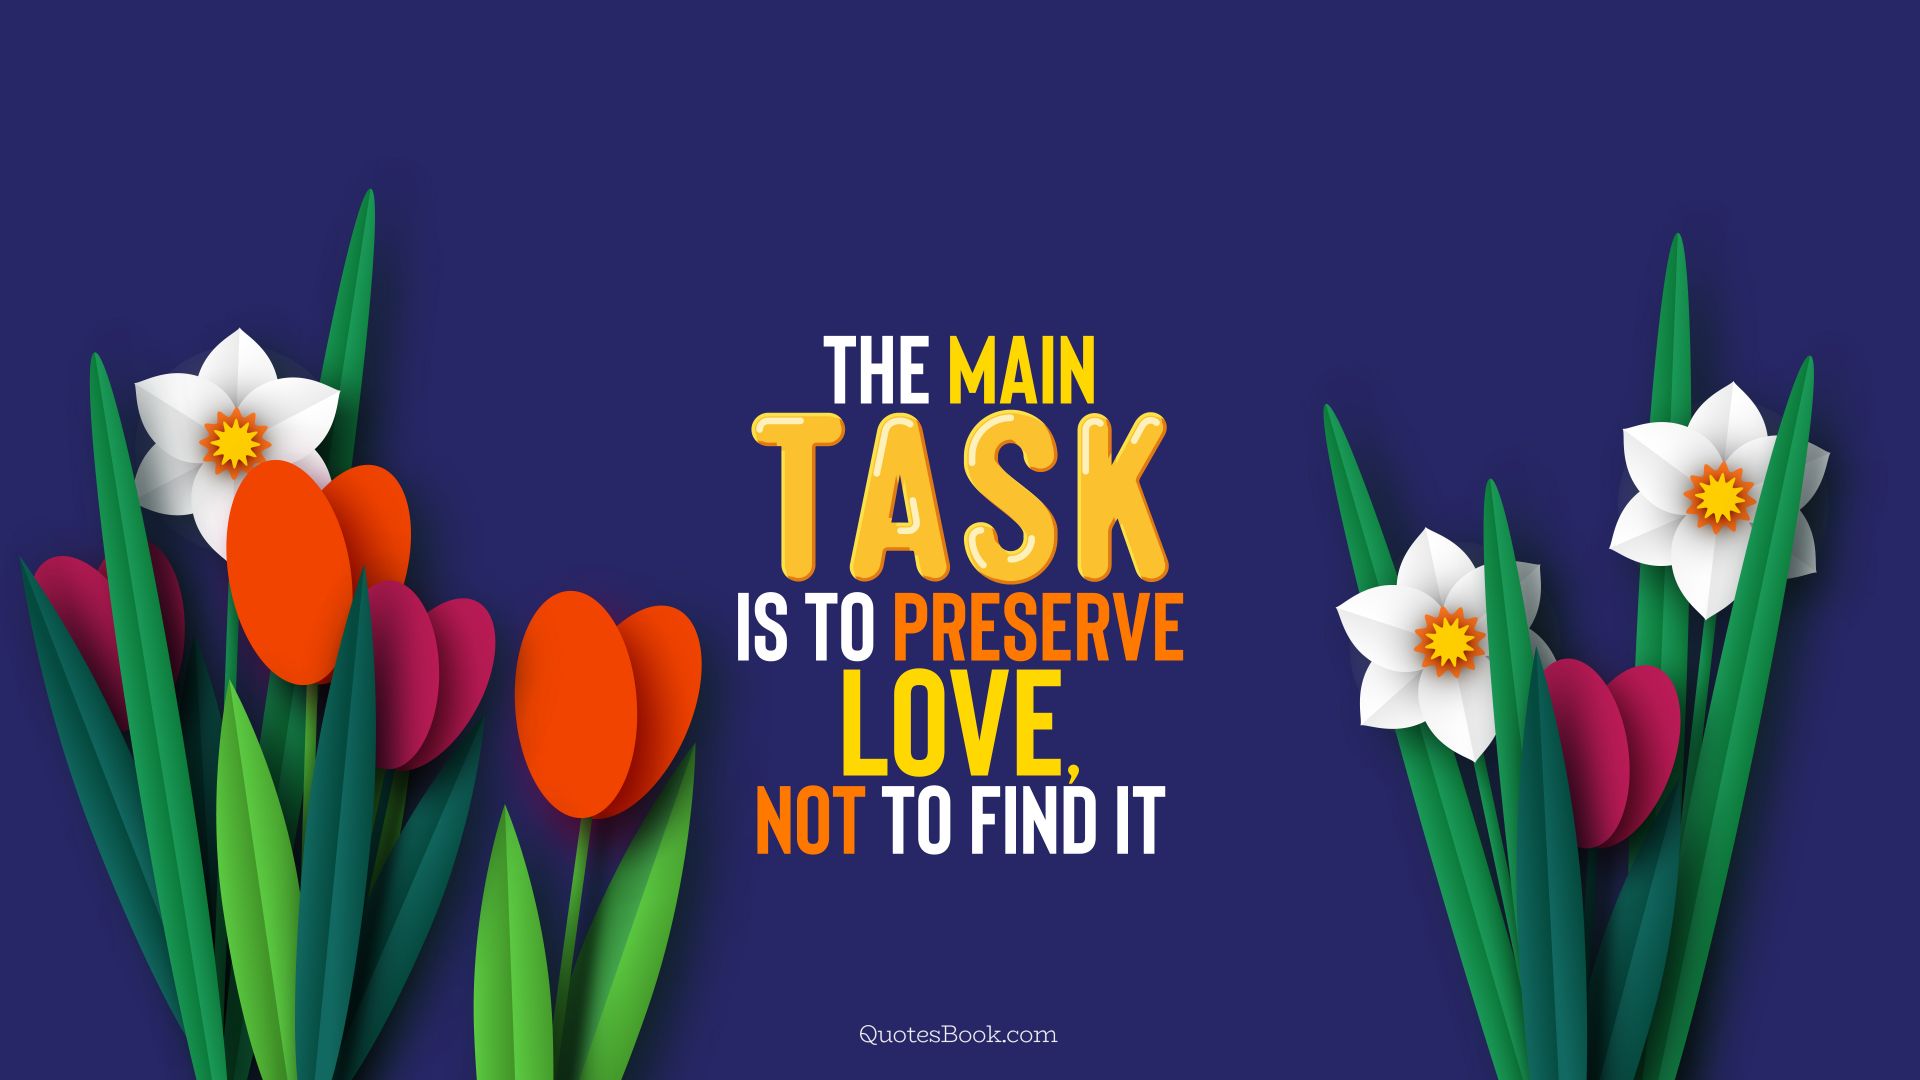 The main task is to preserve love, not to find it. - Quote by QuotesBook